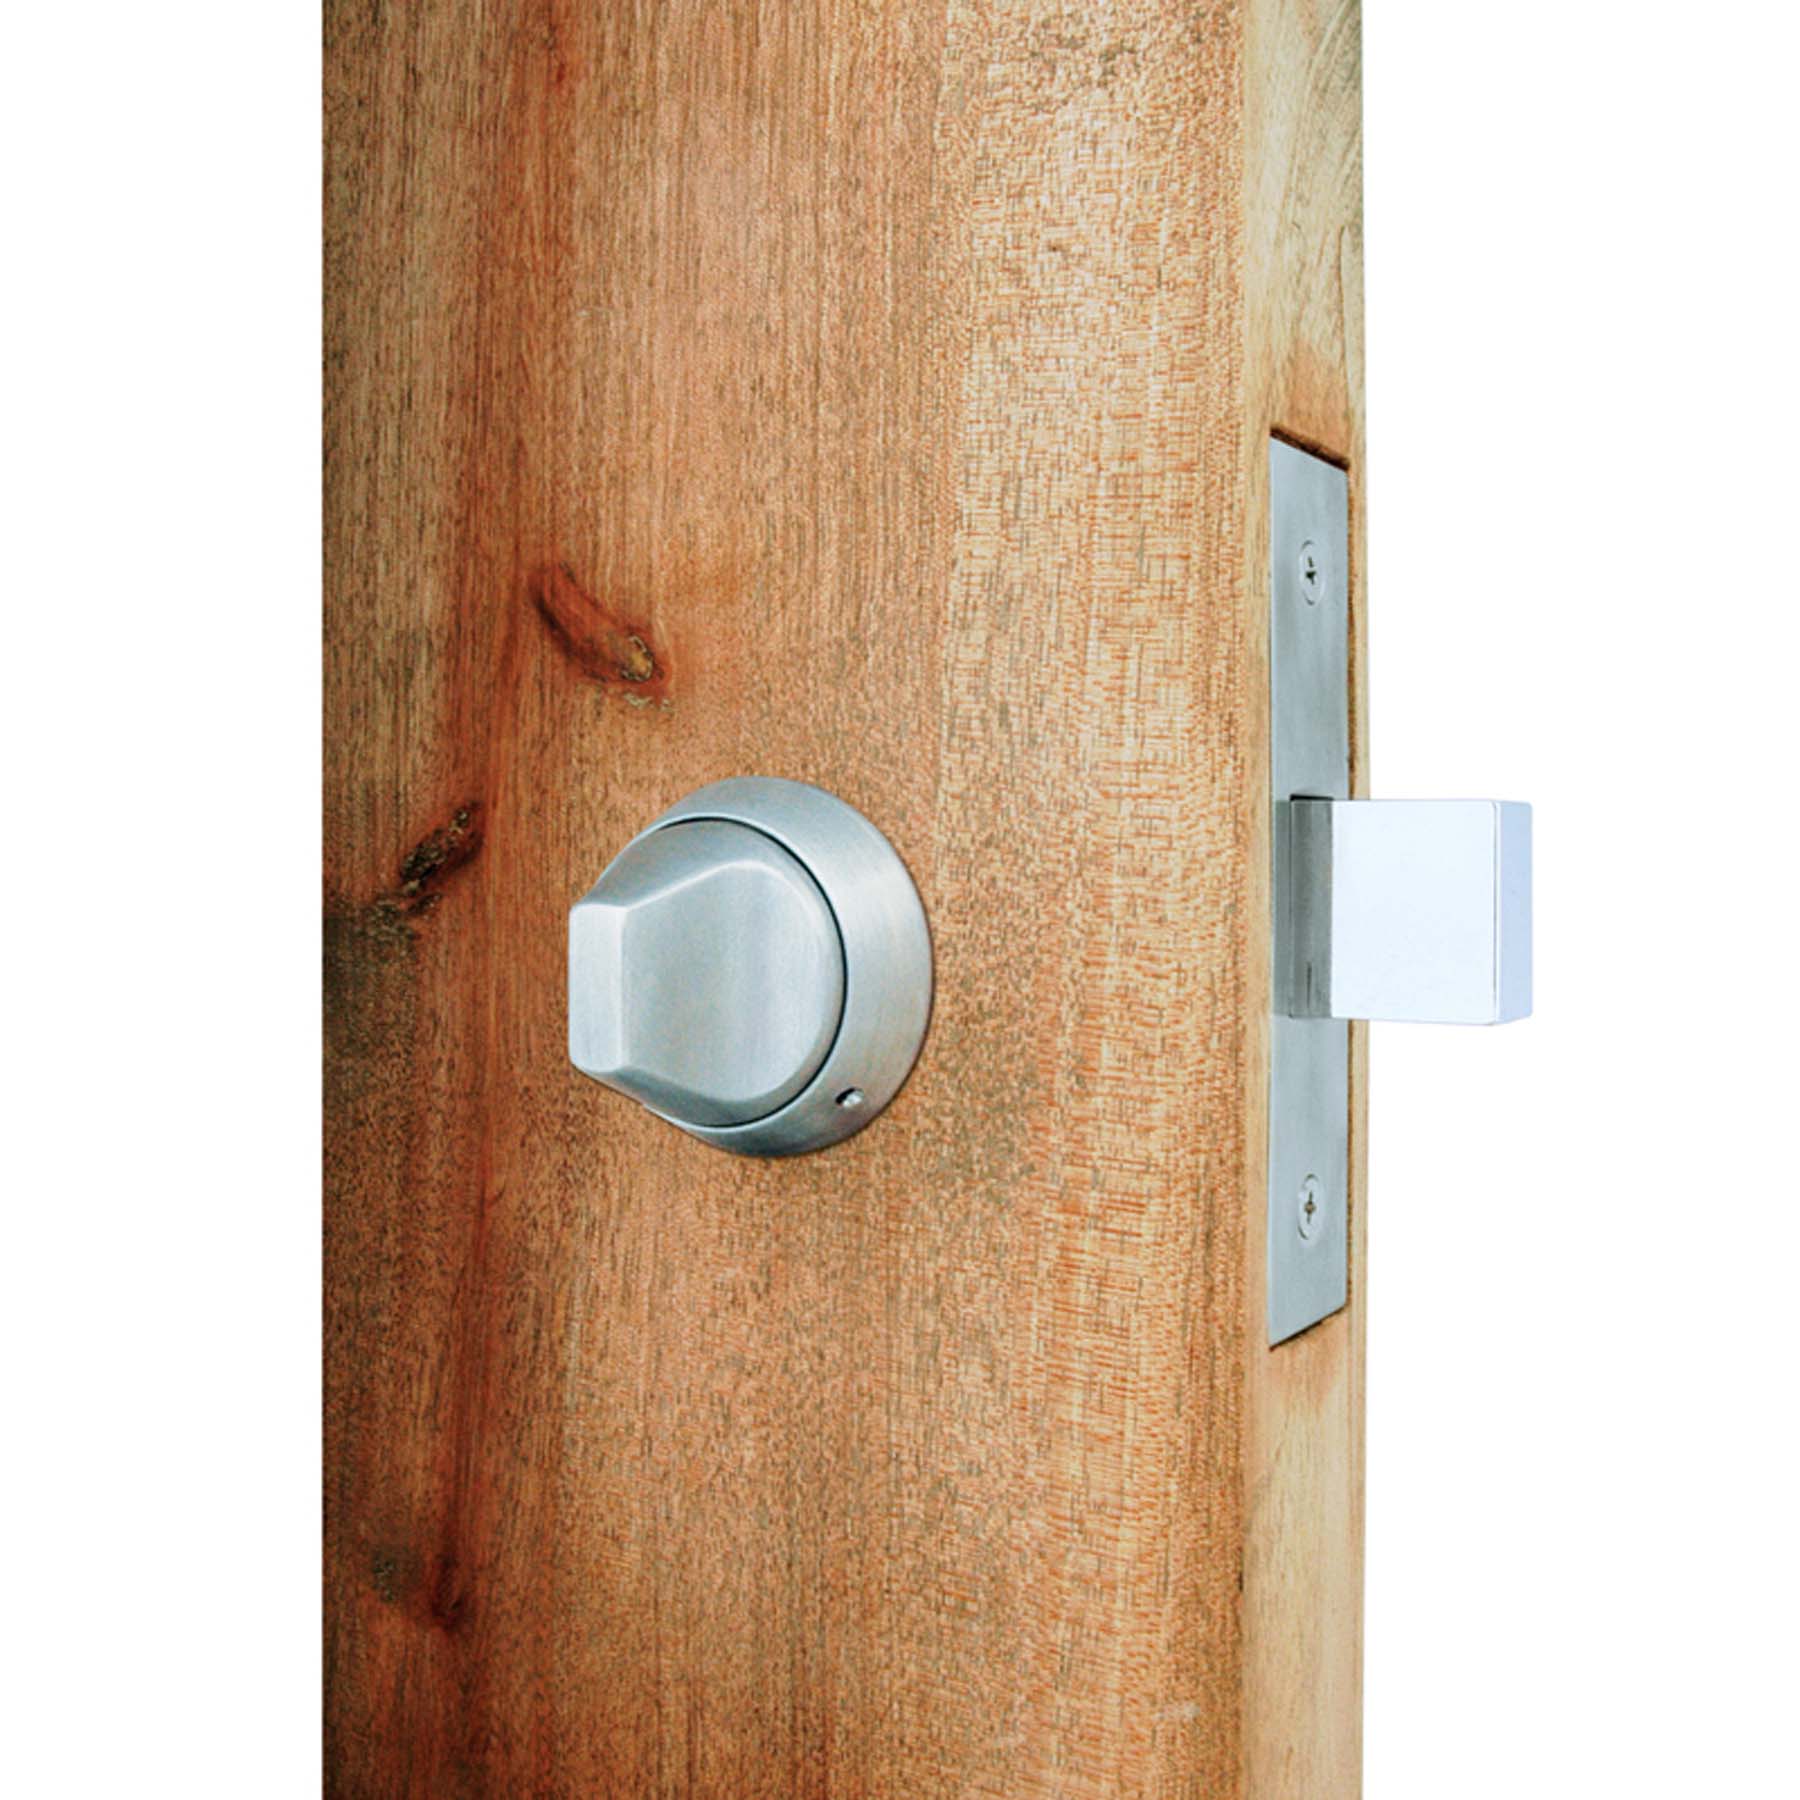 Close up of the deadbolt lock with ligature resistant thumb turn